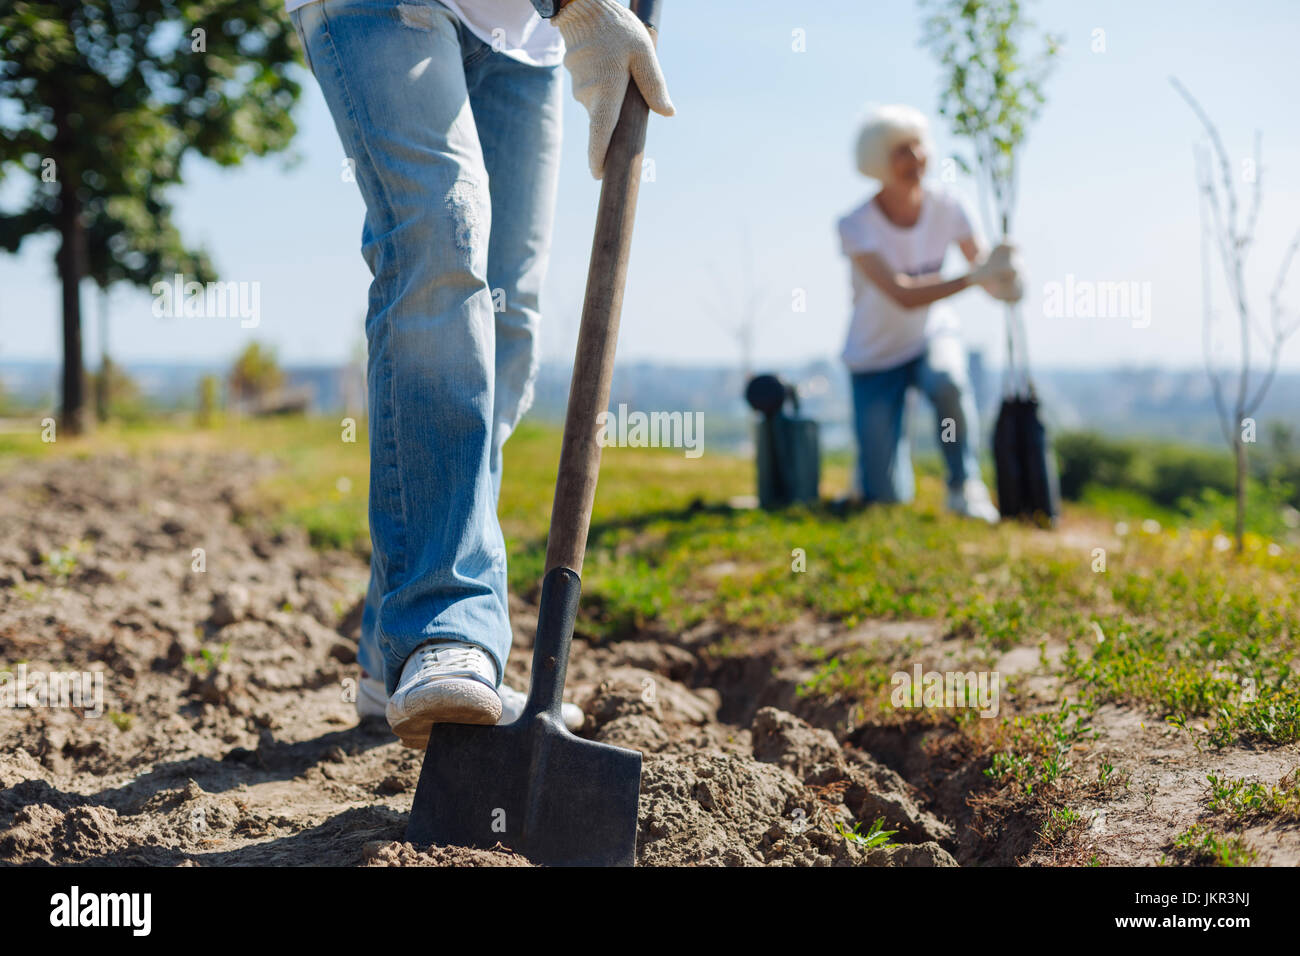 Energetic committed man using shovel to plan trees Stock Photo